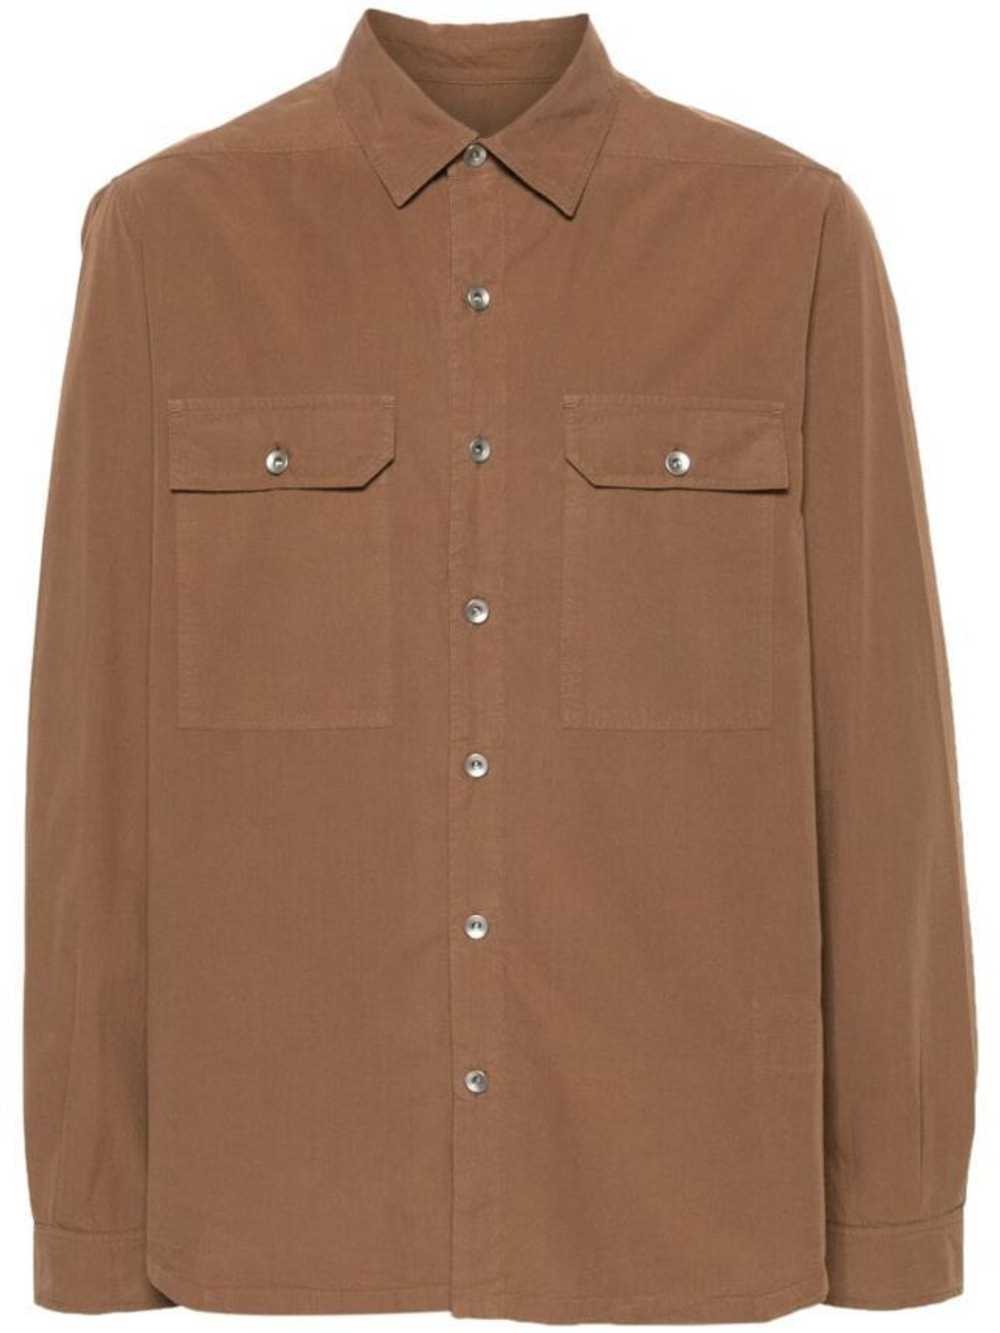 Rick Owens Drkshdw Outershirt - image 1